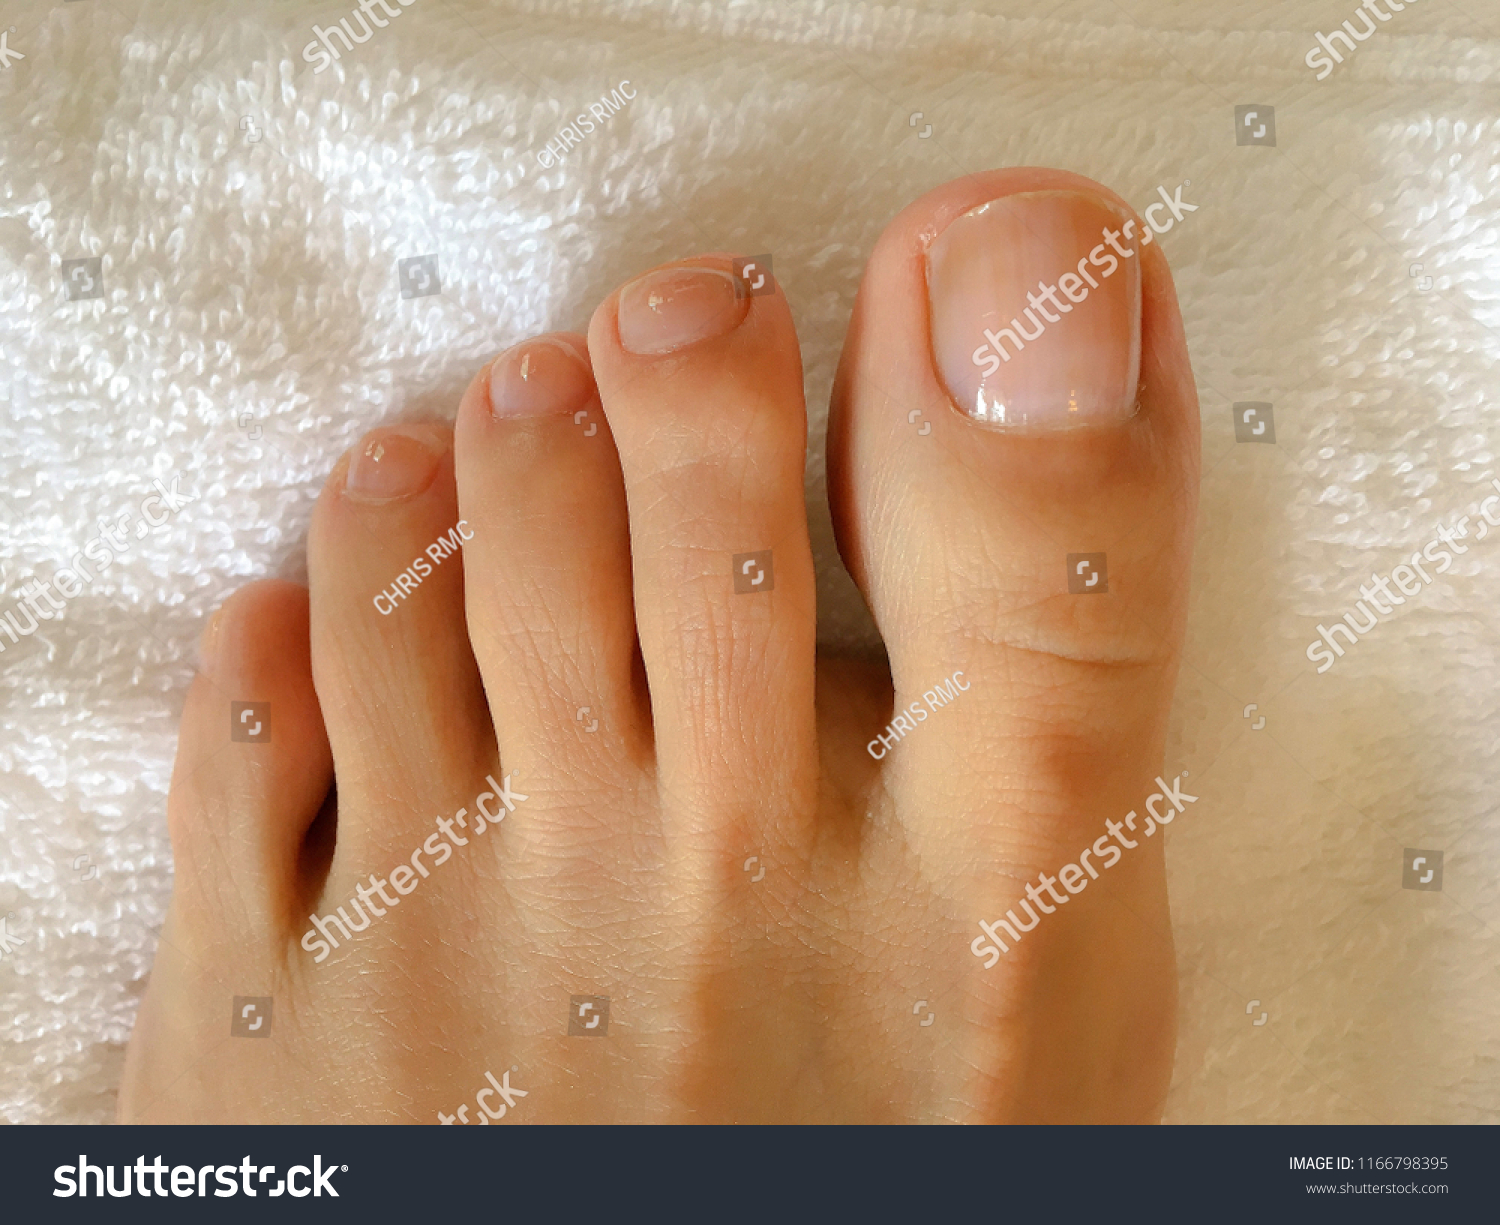 Toes soles and Foot Pain: